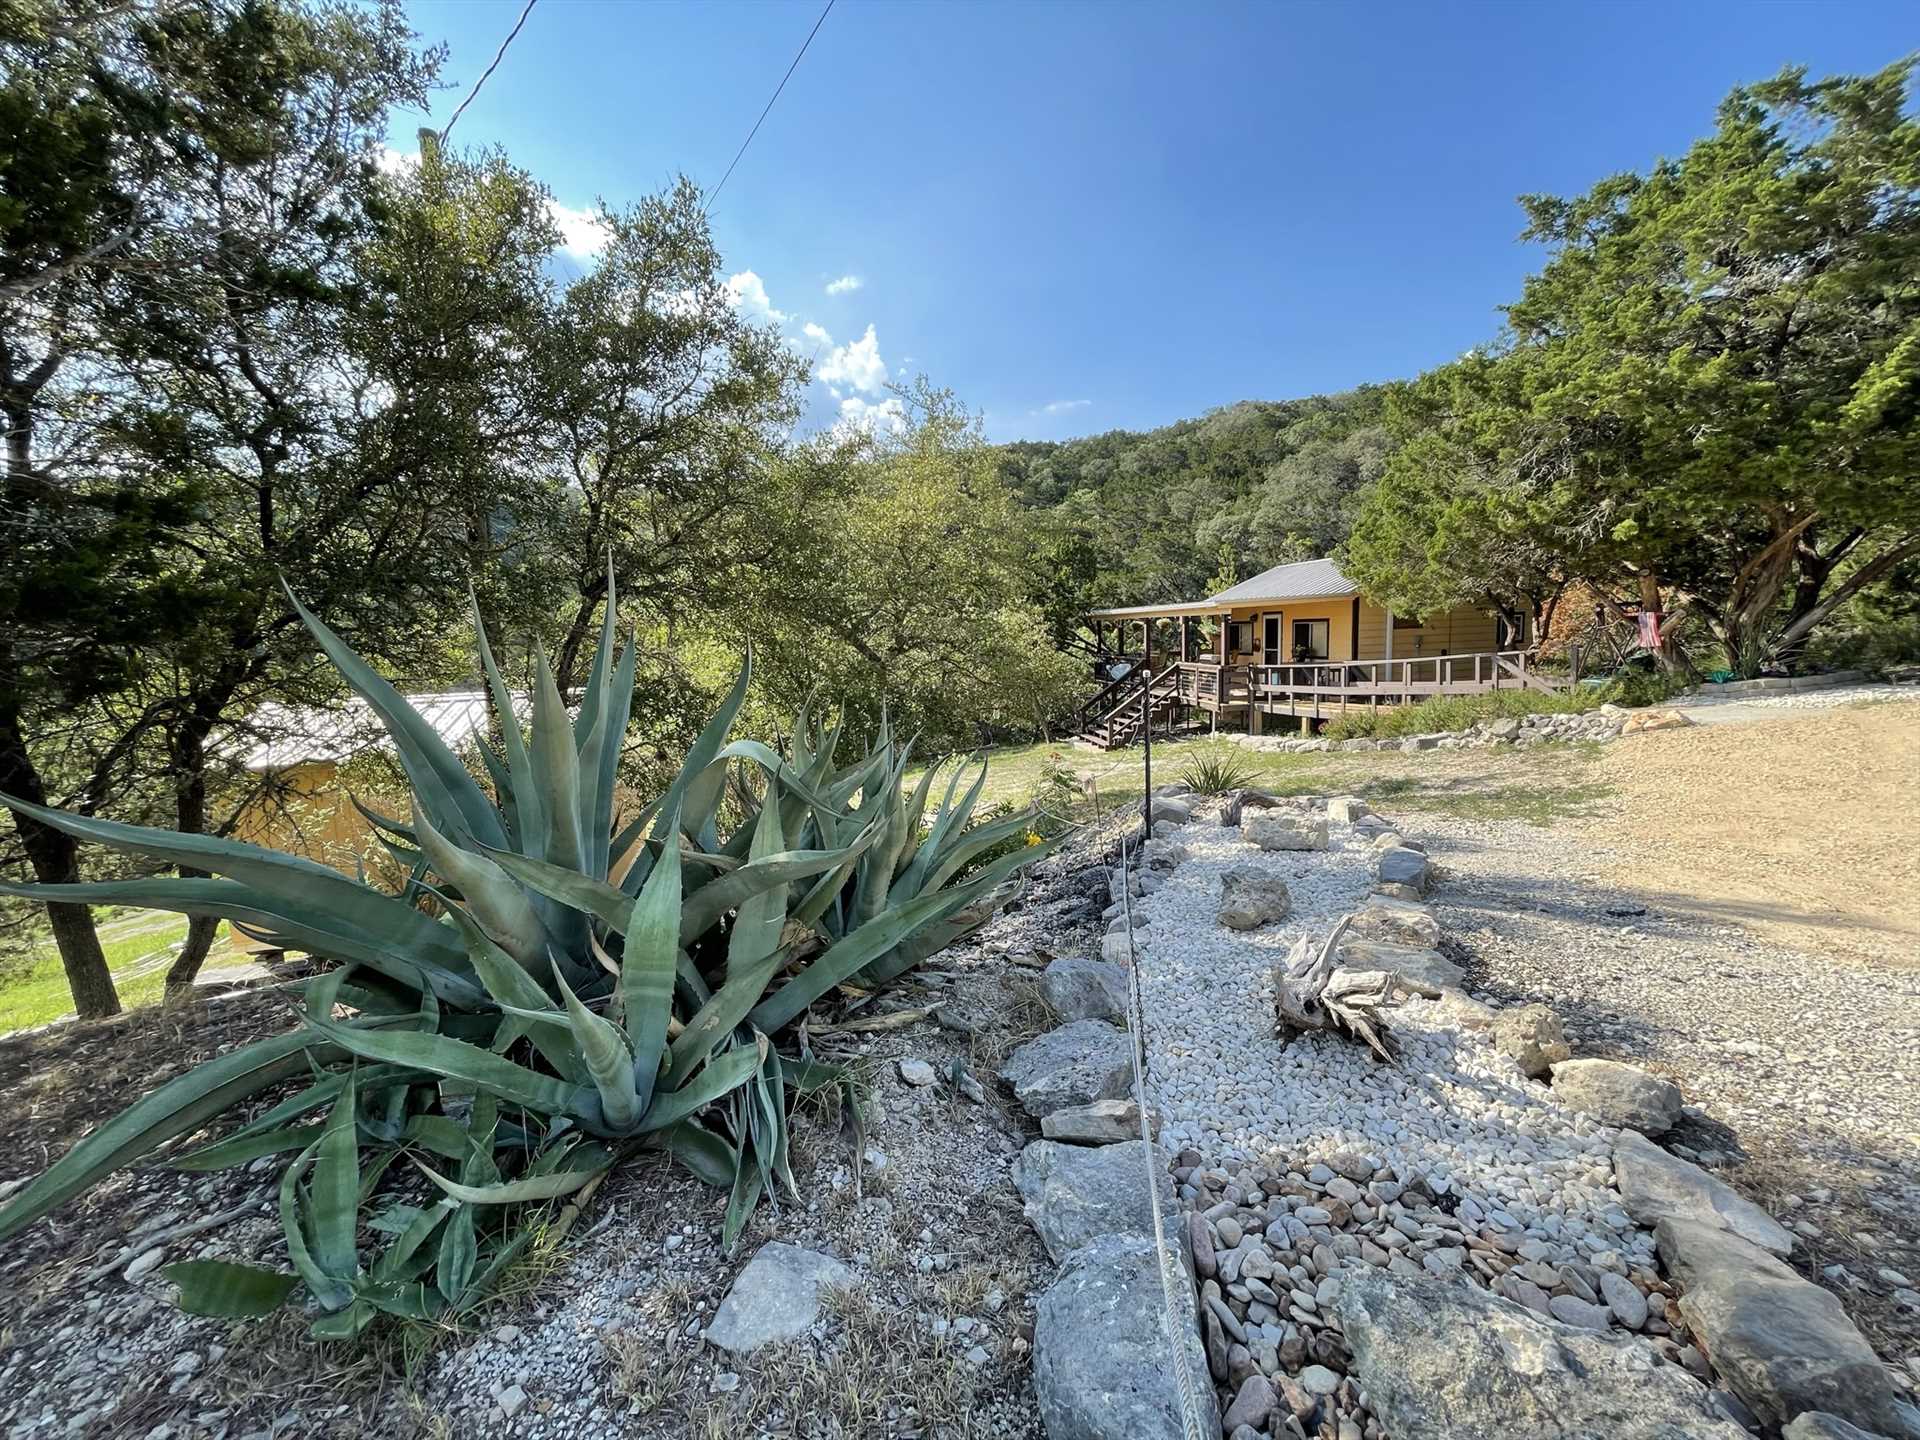                                                 Giddy Up is perched on 11 acres of the beautiful Hill Country, and visitors are encouraged to explore!